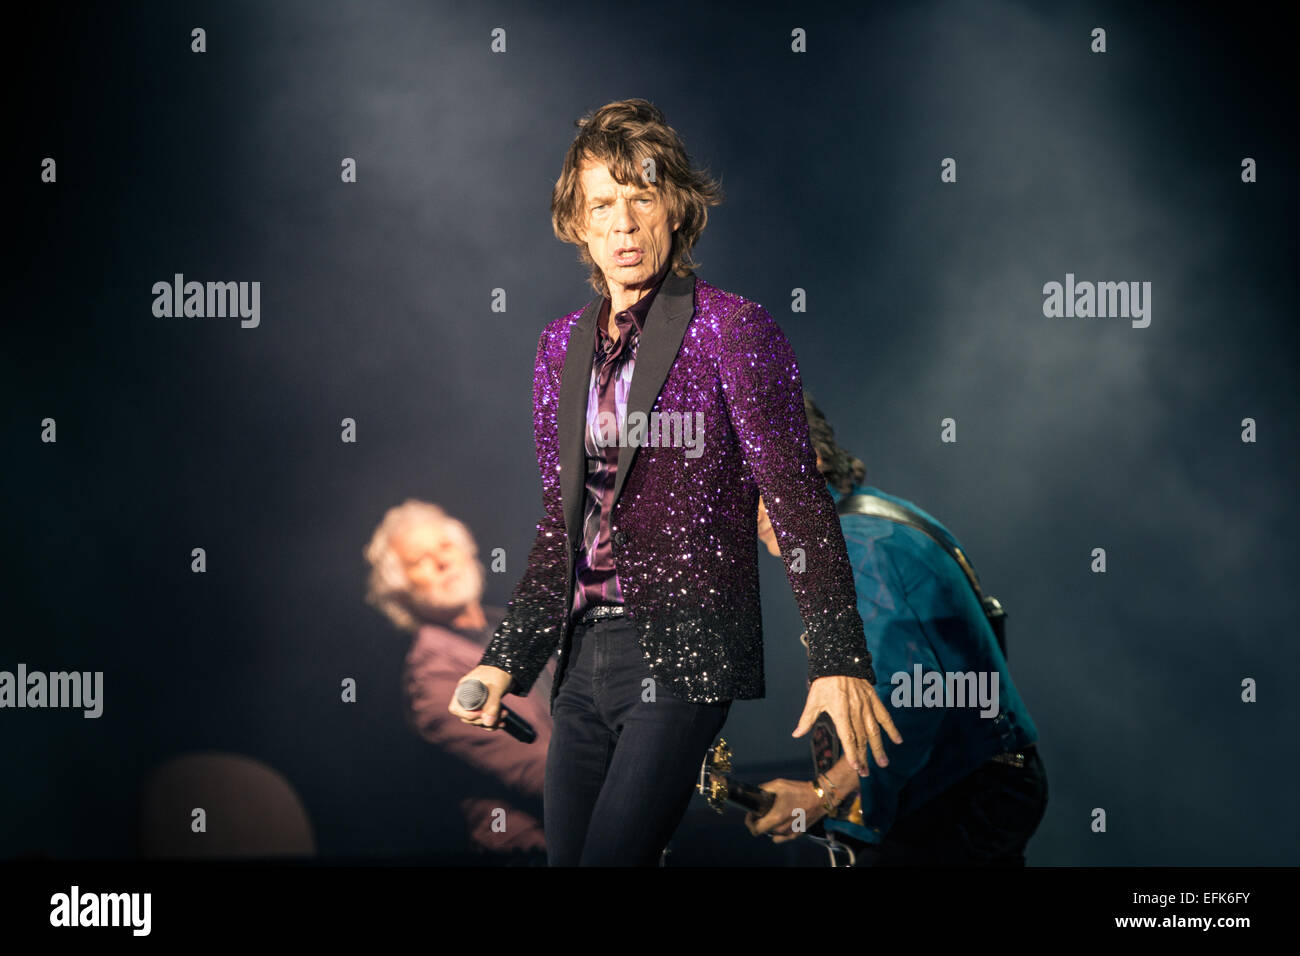 Mick Jagger from the Rolling Stones Stock Photo